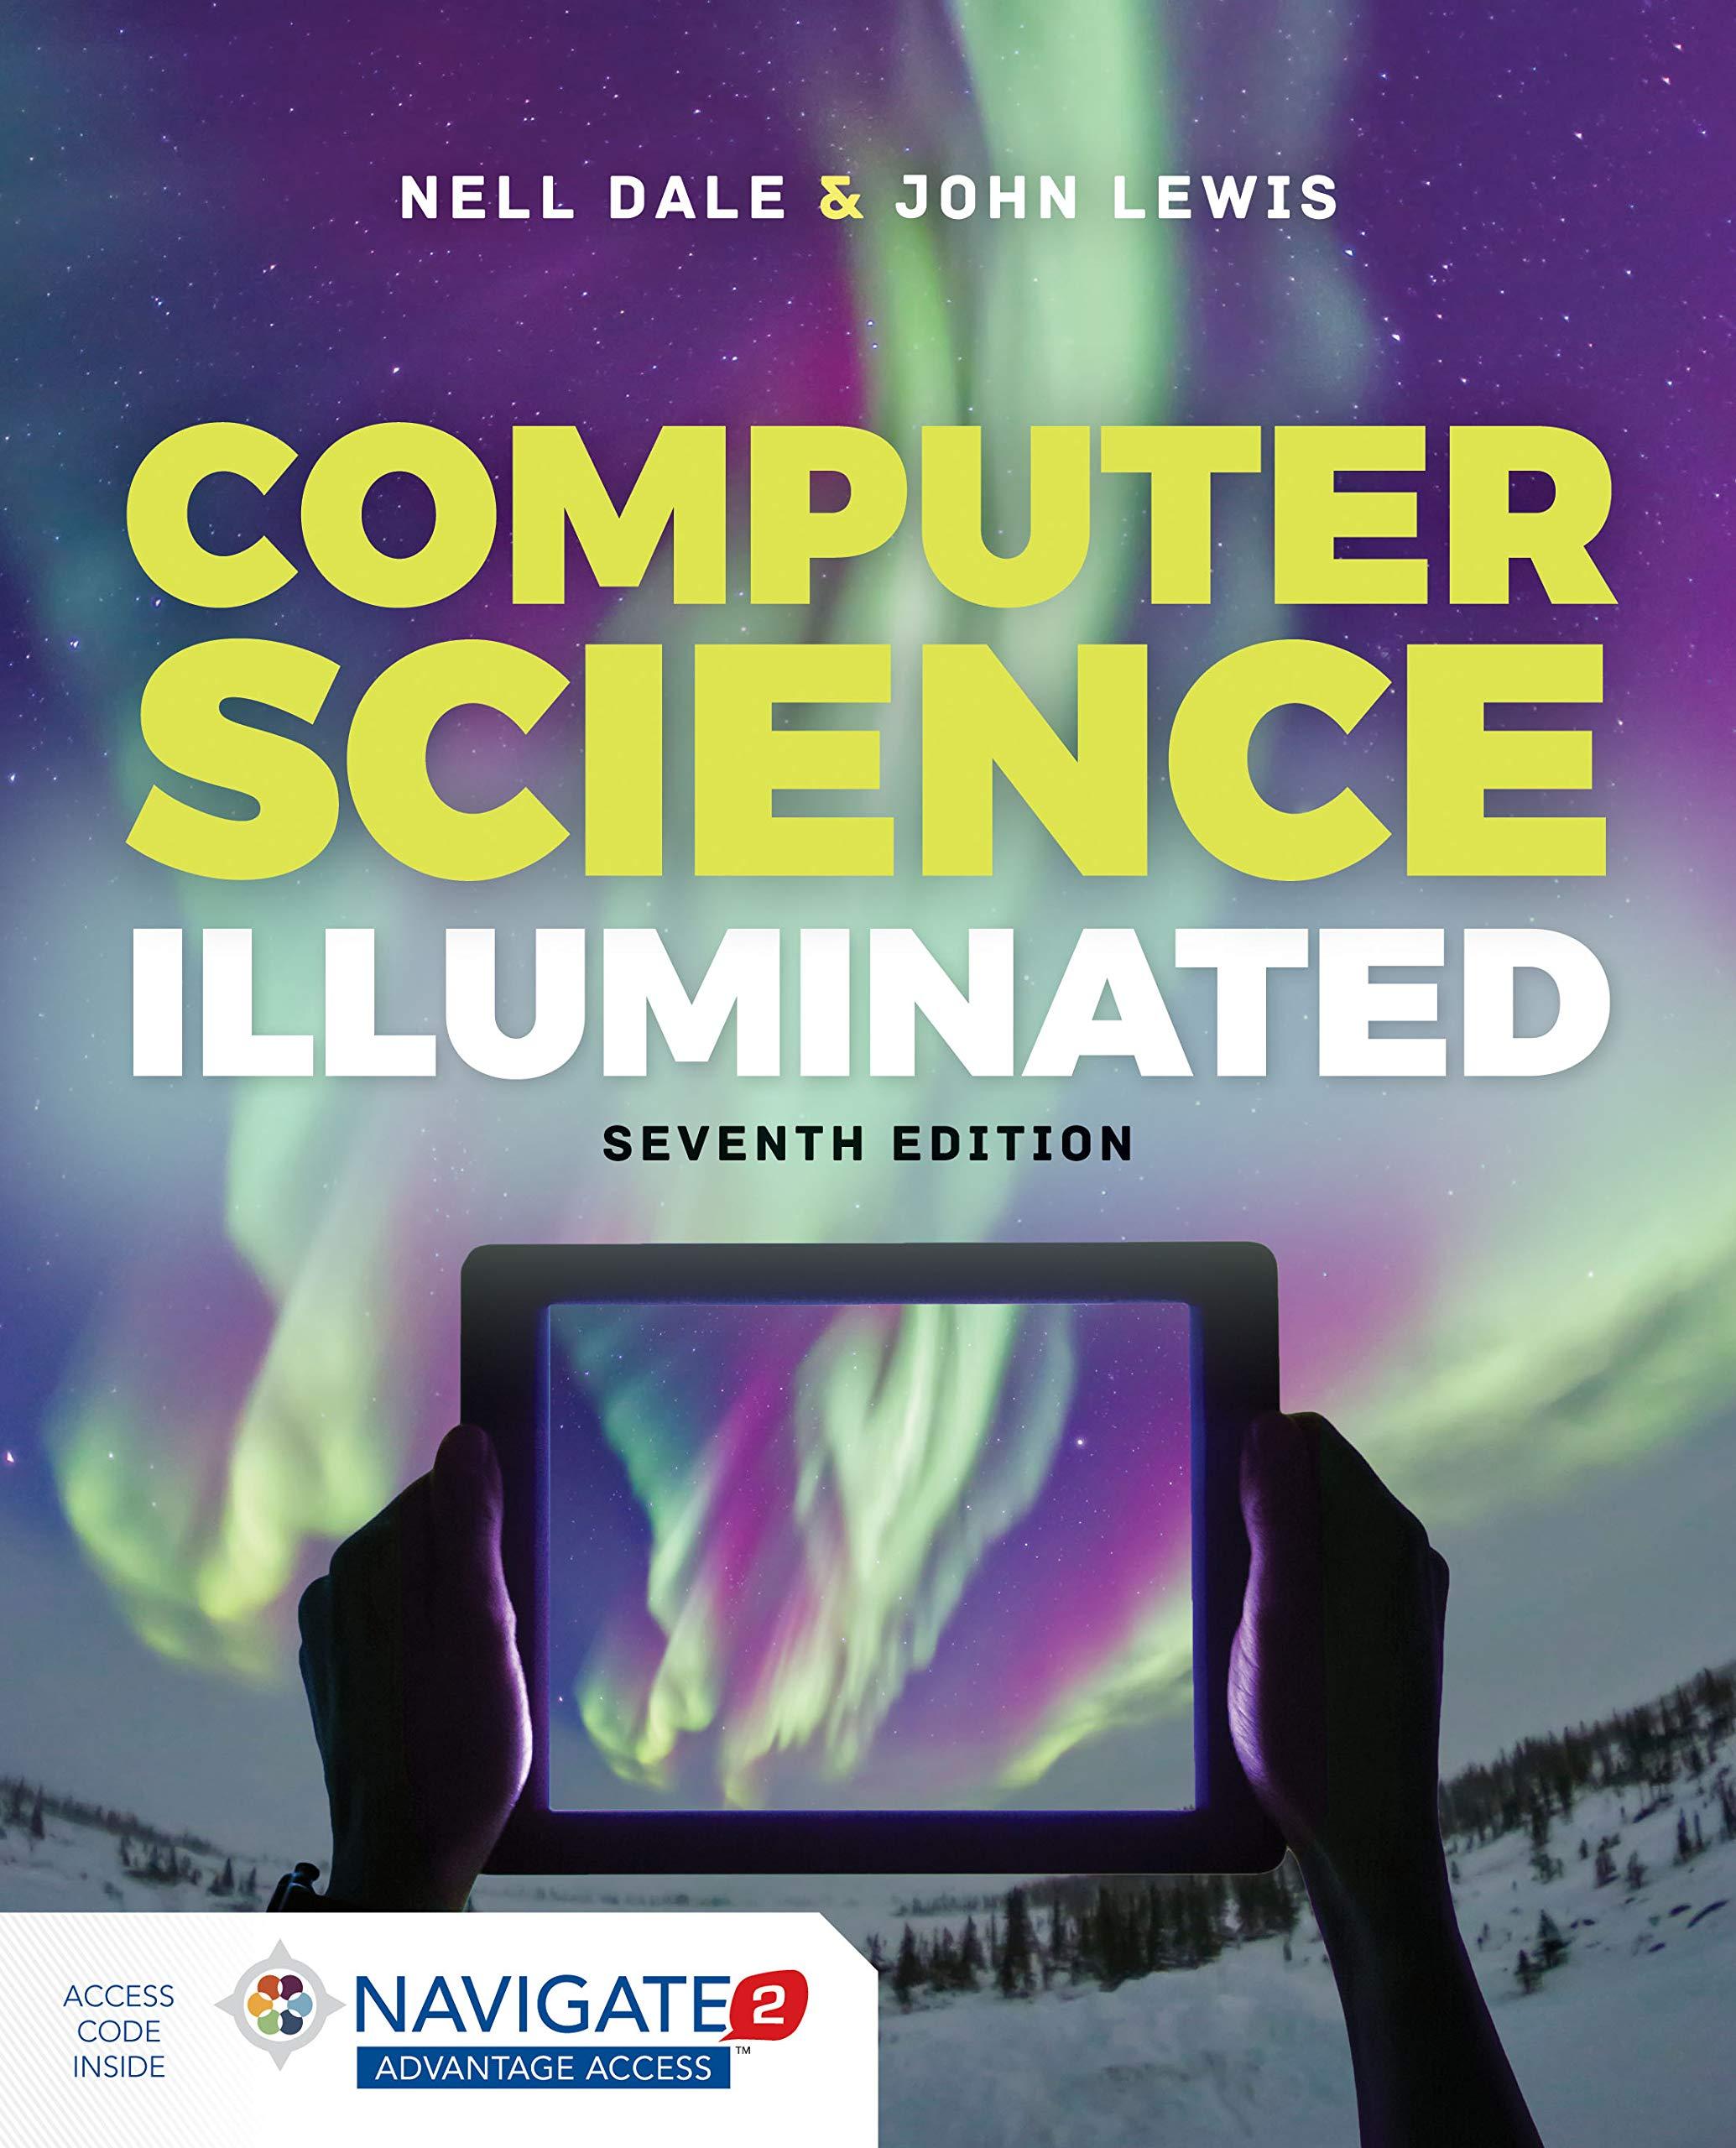 computer science illuminated 7th edition nell dale, john lewis 1284155617, 9781284155617